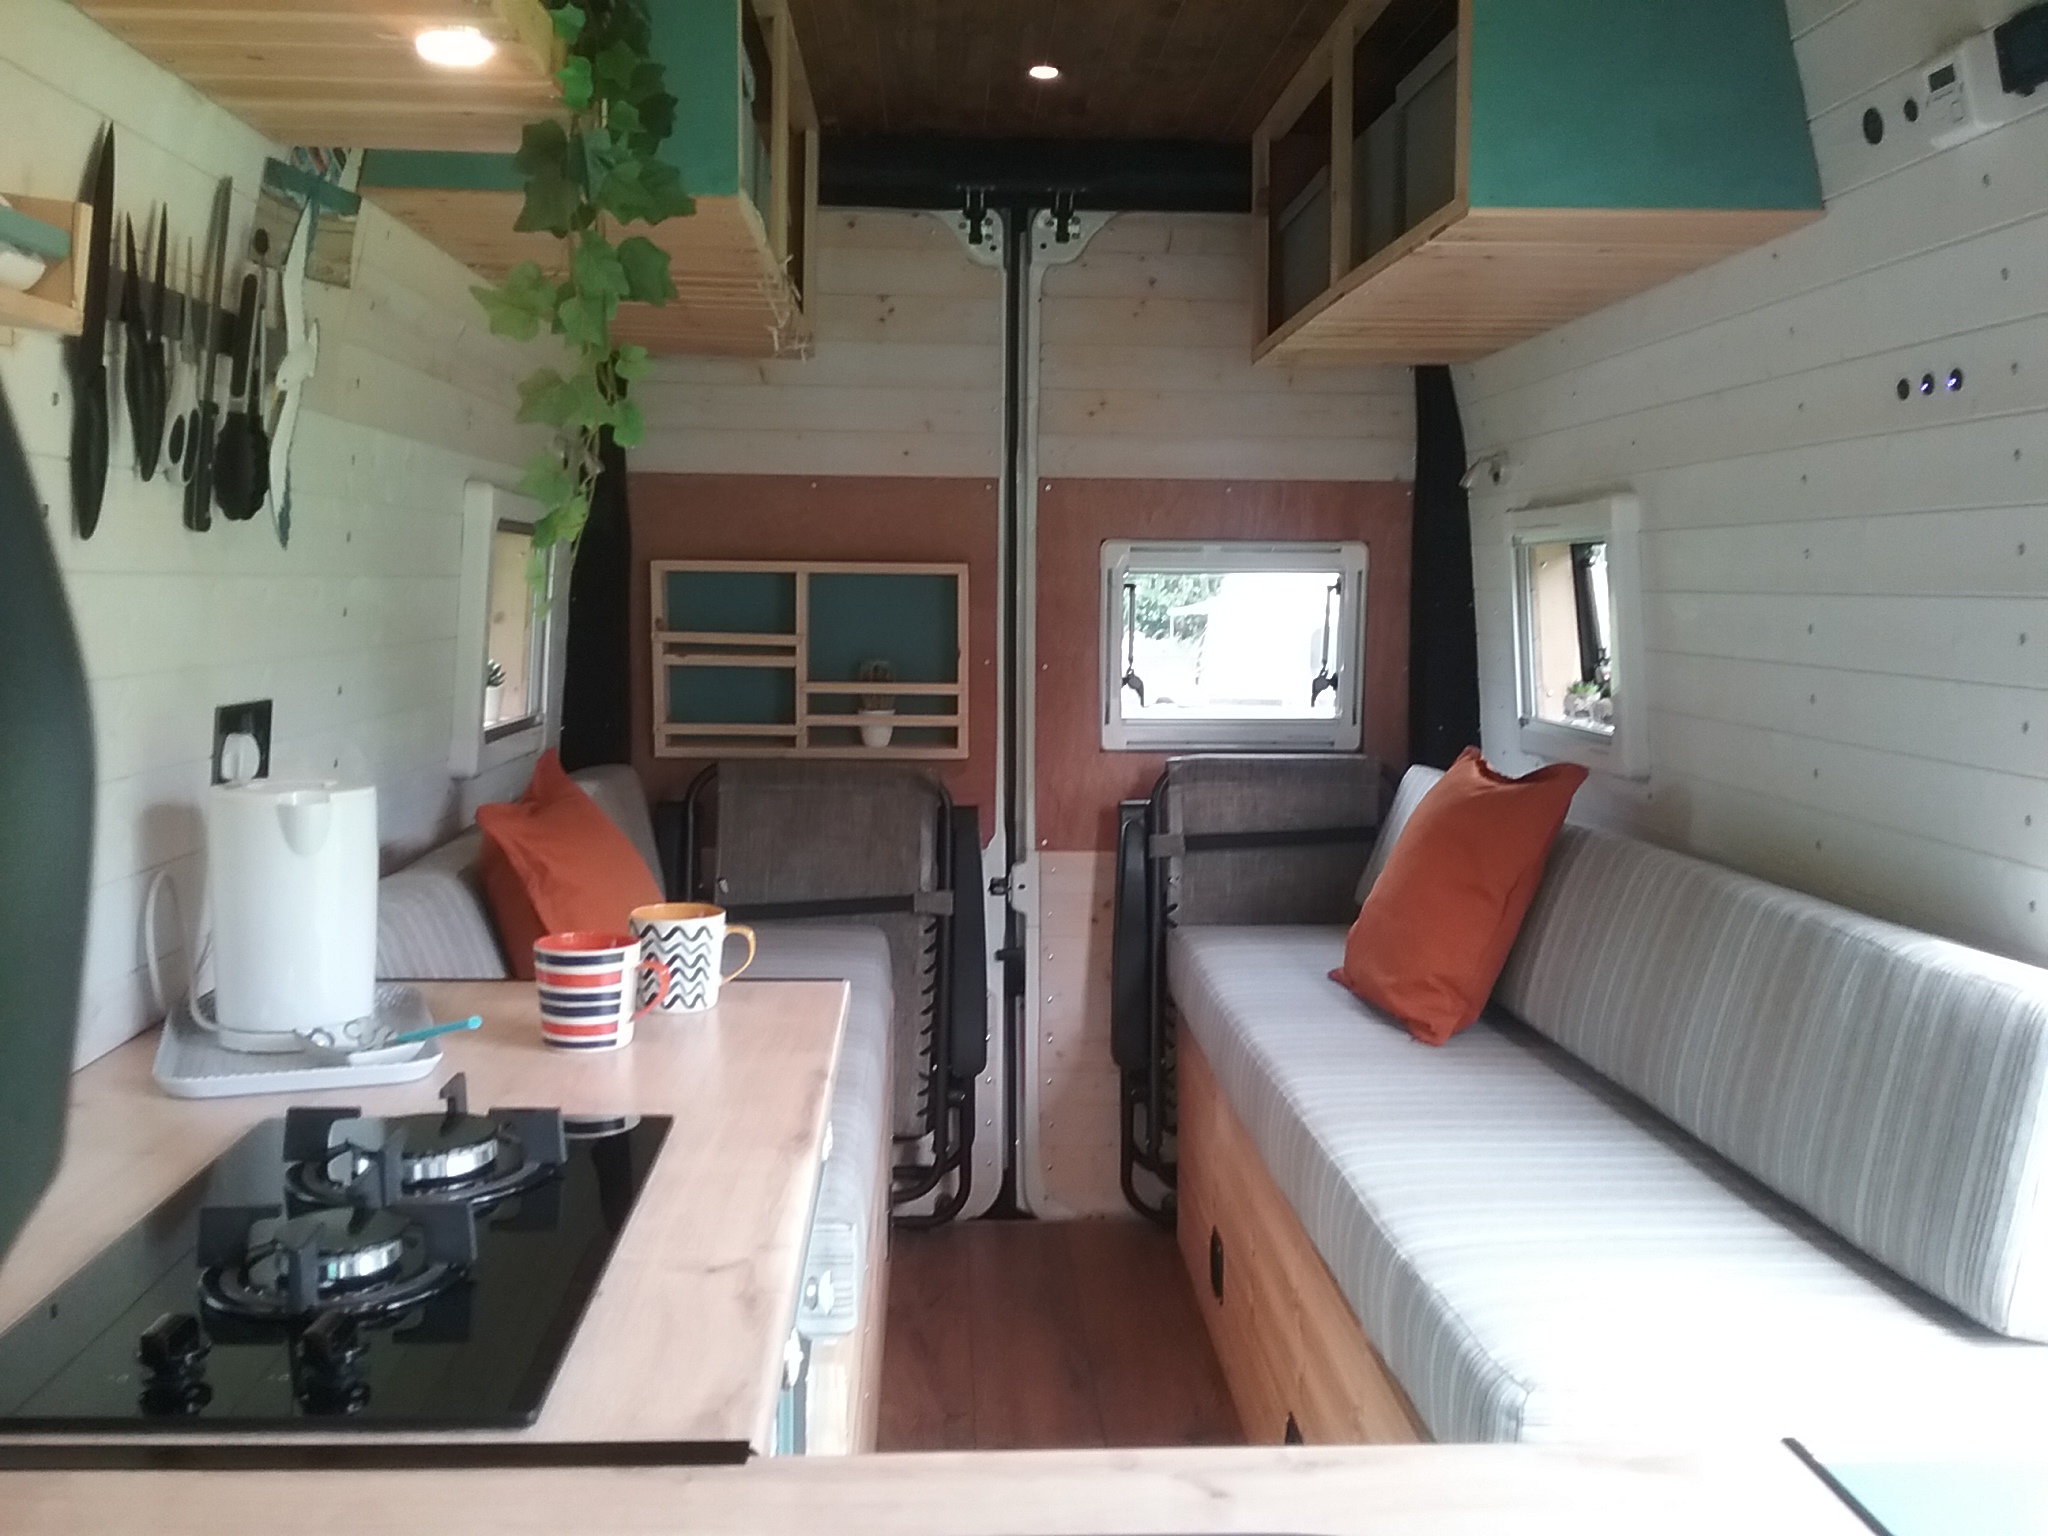 Interior of a cozy van conversion featuring a kitchenette with a stove on the left, a striped sofa with orange cushions on the right, and small windows on both sides allowing natural light. The walls are lined with light-colored wooden panels, and there are hanging plants and shelves for storage.